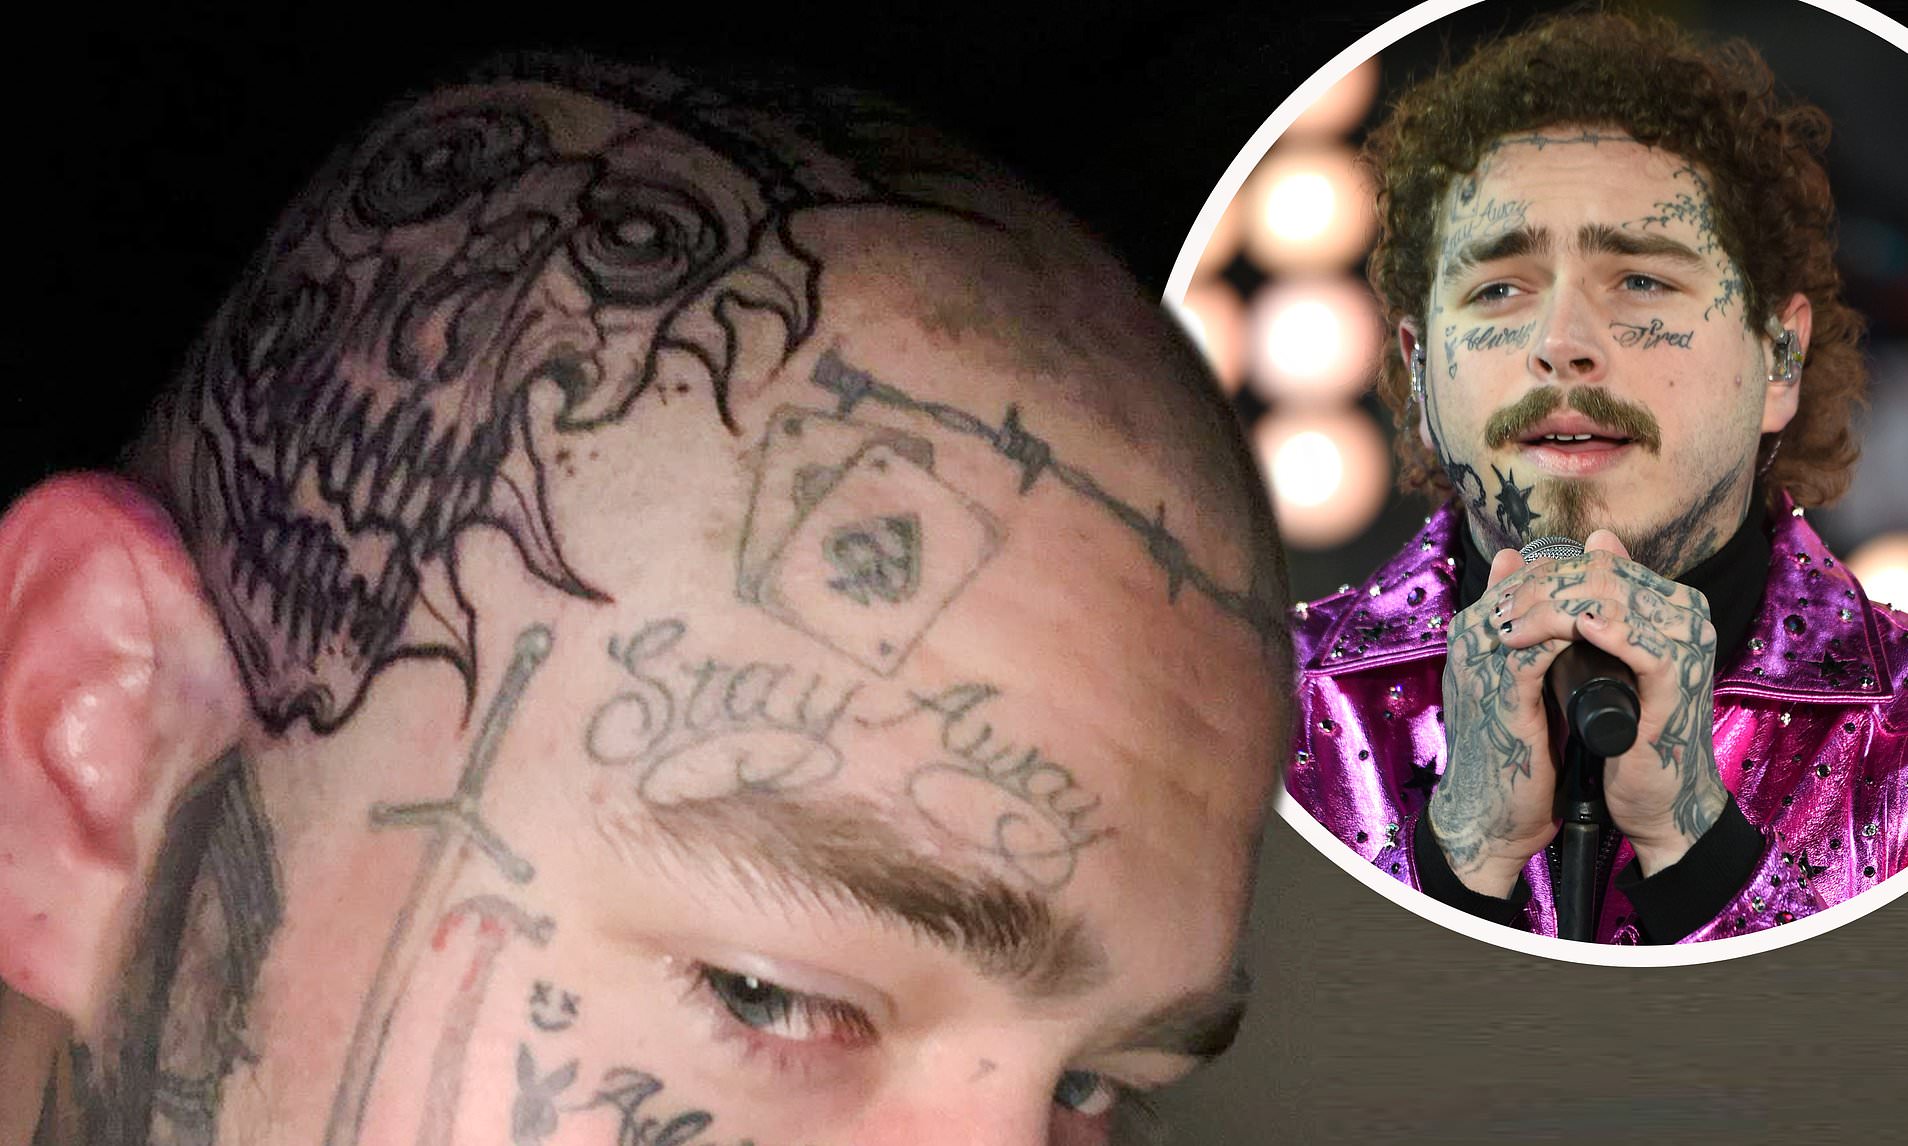 Post Malone Tattoos Arms / Post Malone Temporary Tattoo Face Neck.